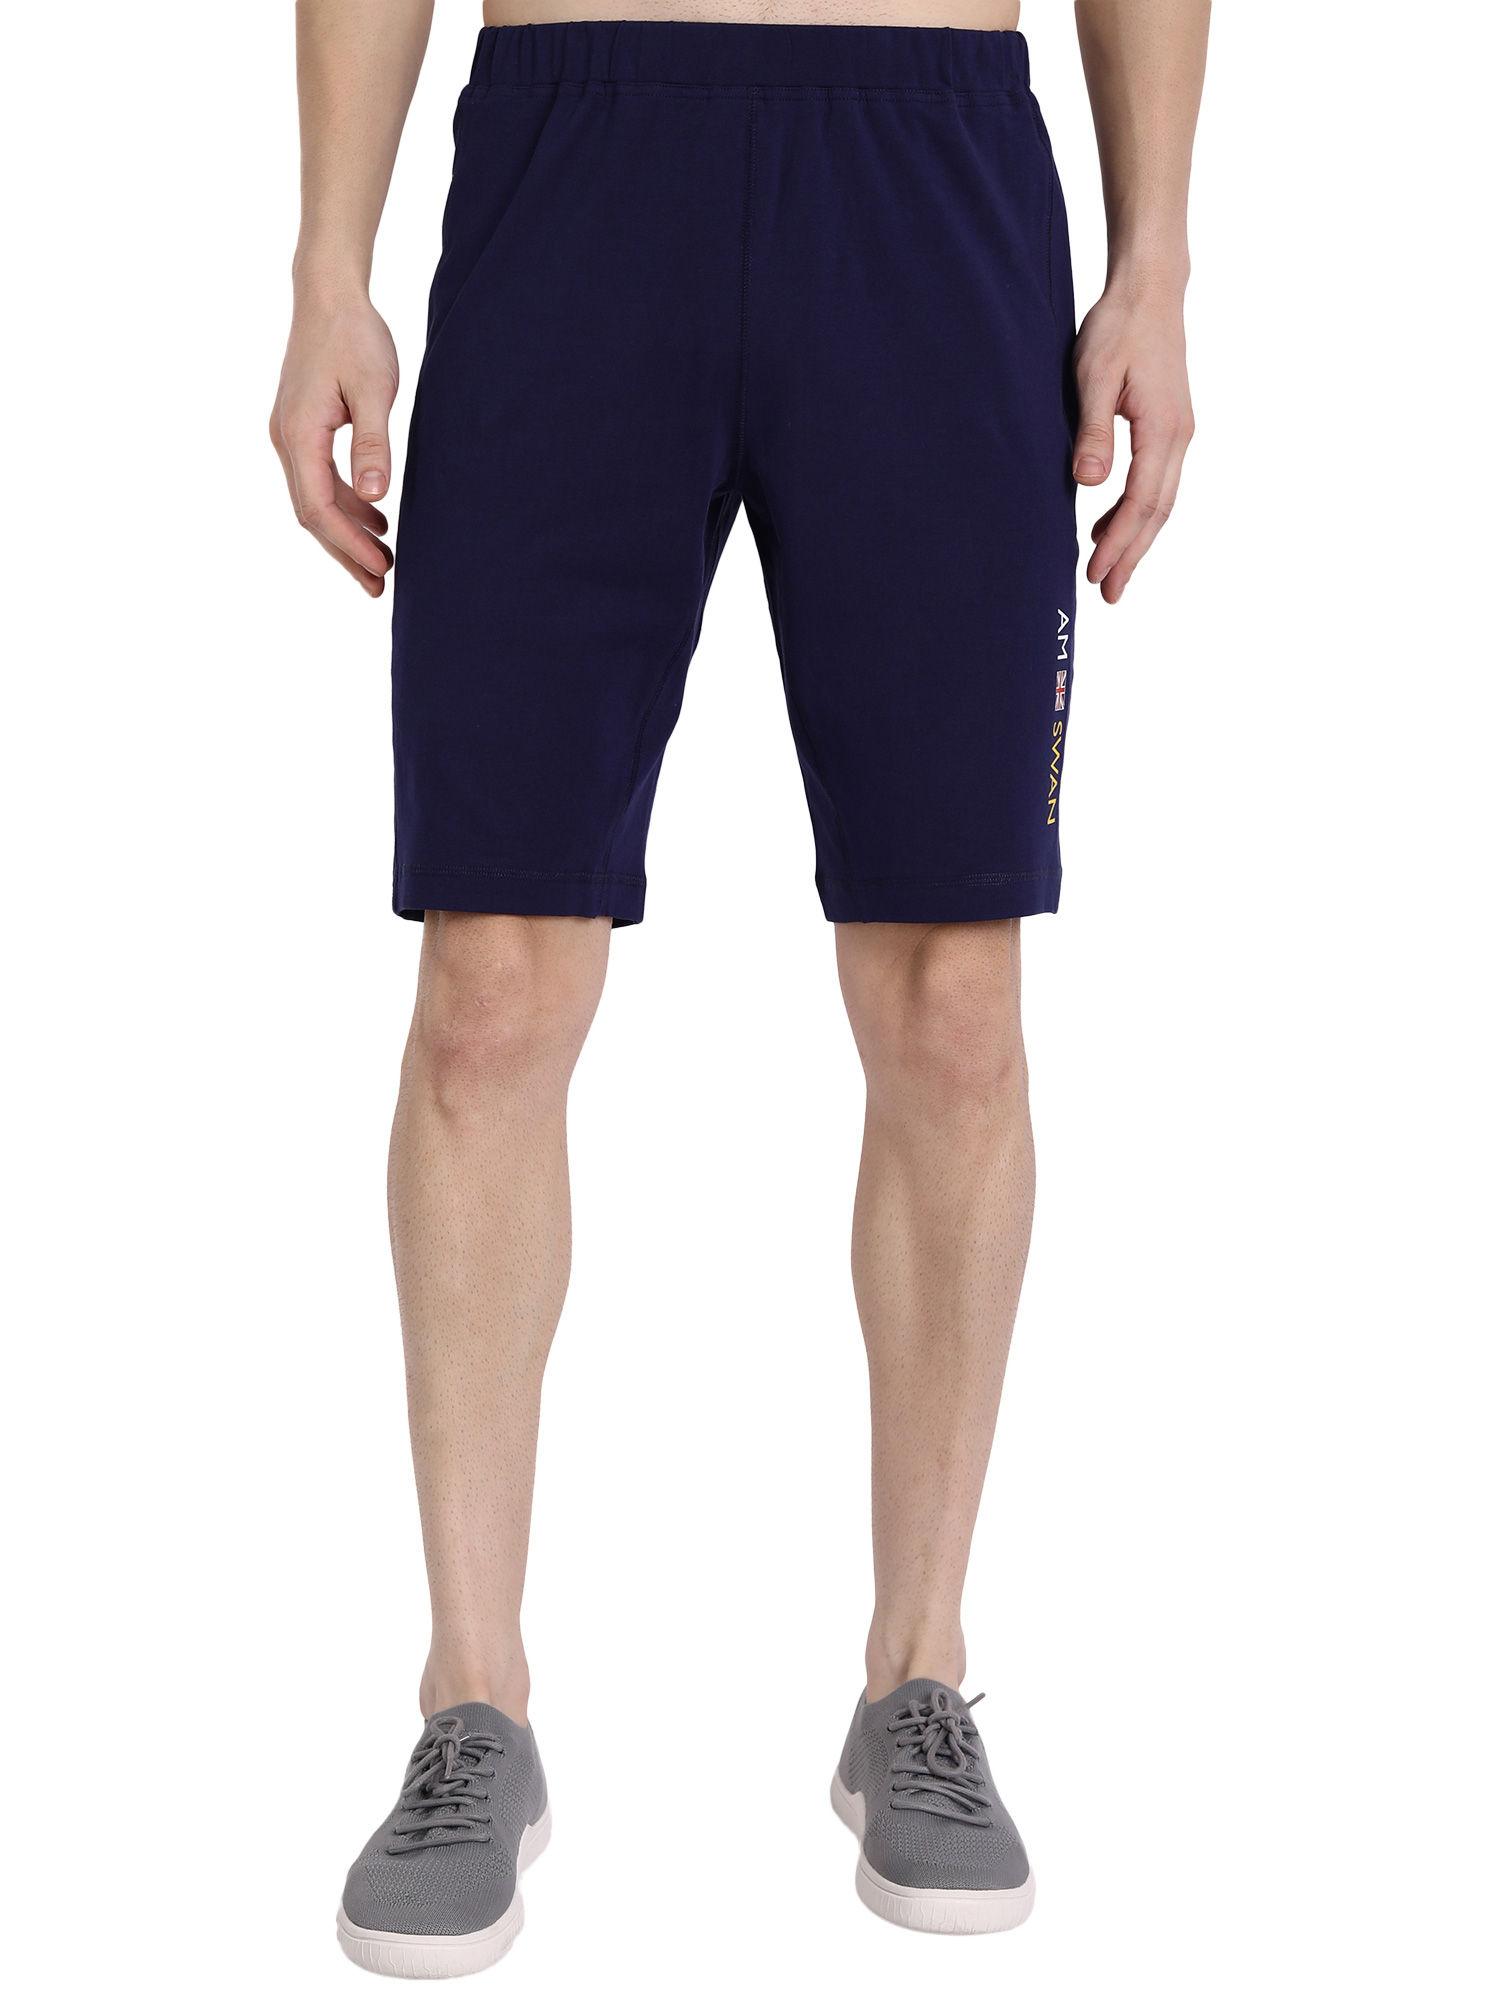 cotton rich lycra solid shorts in navy blue